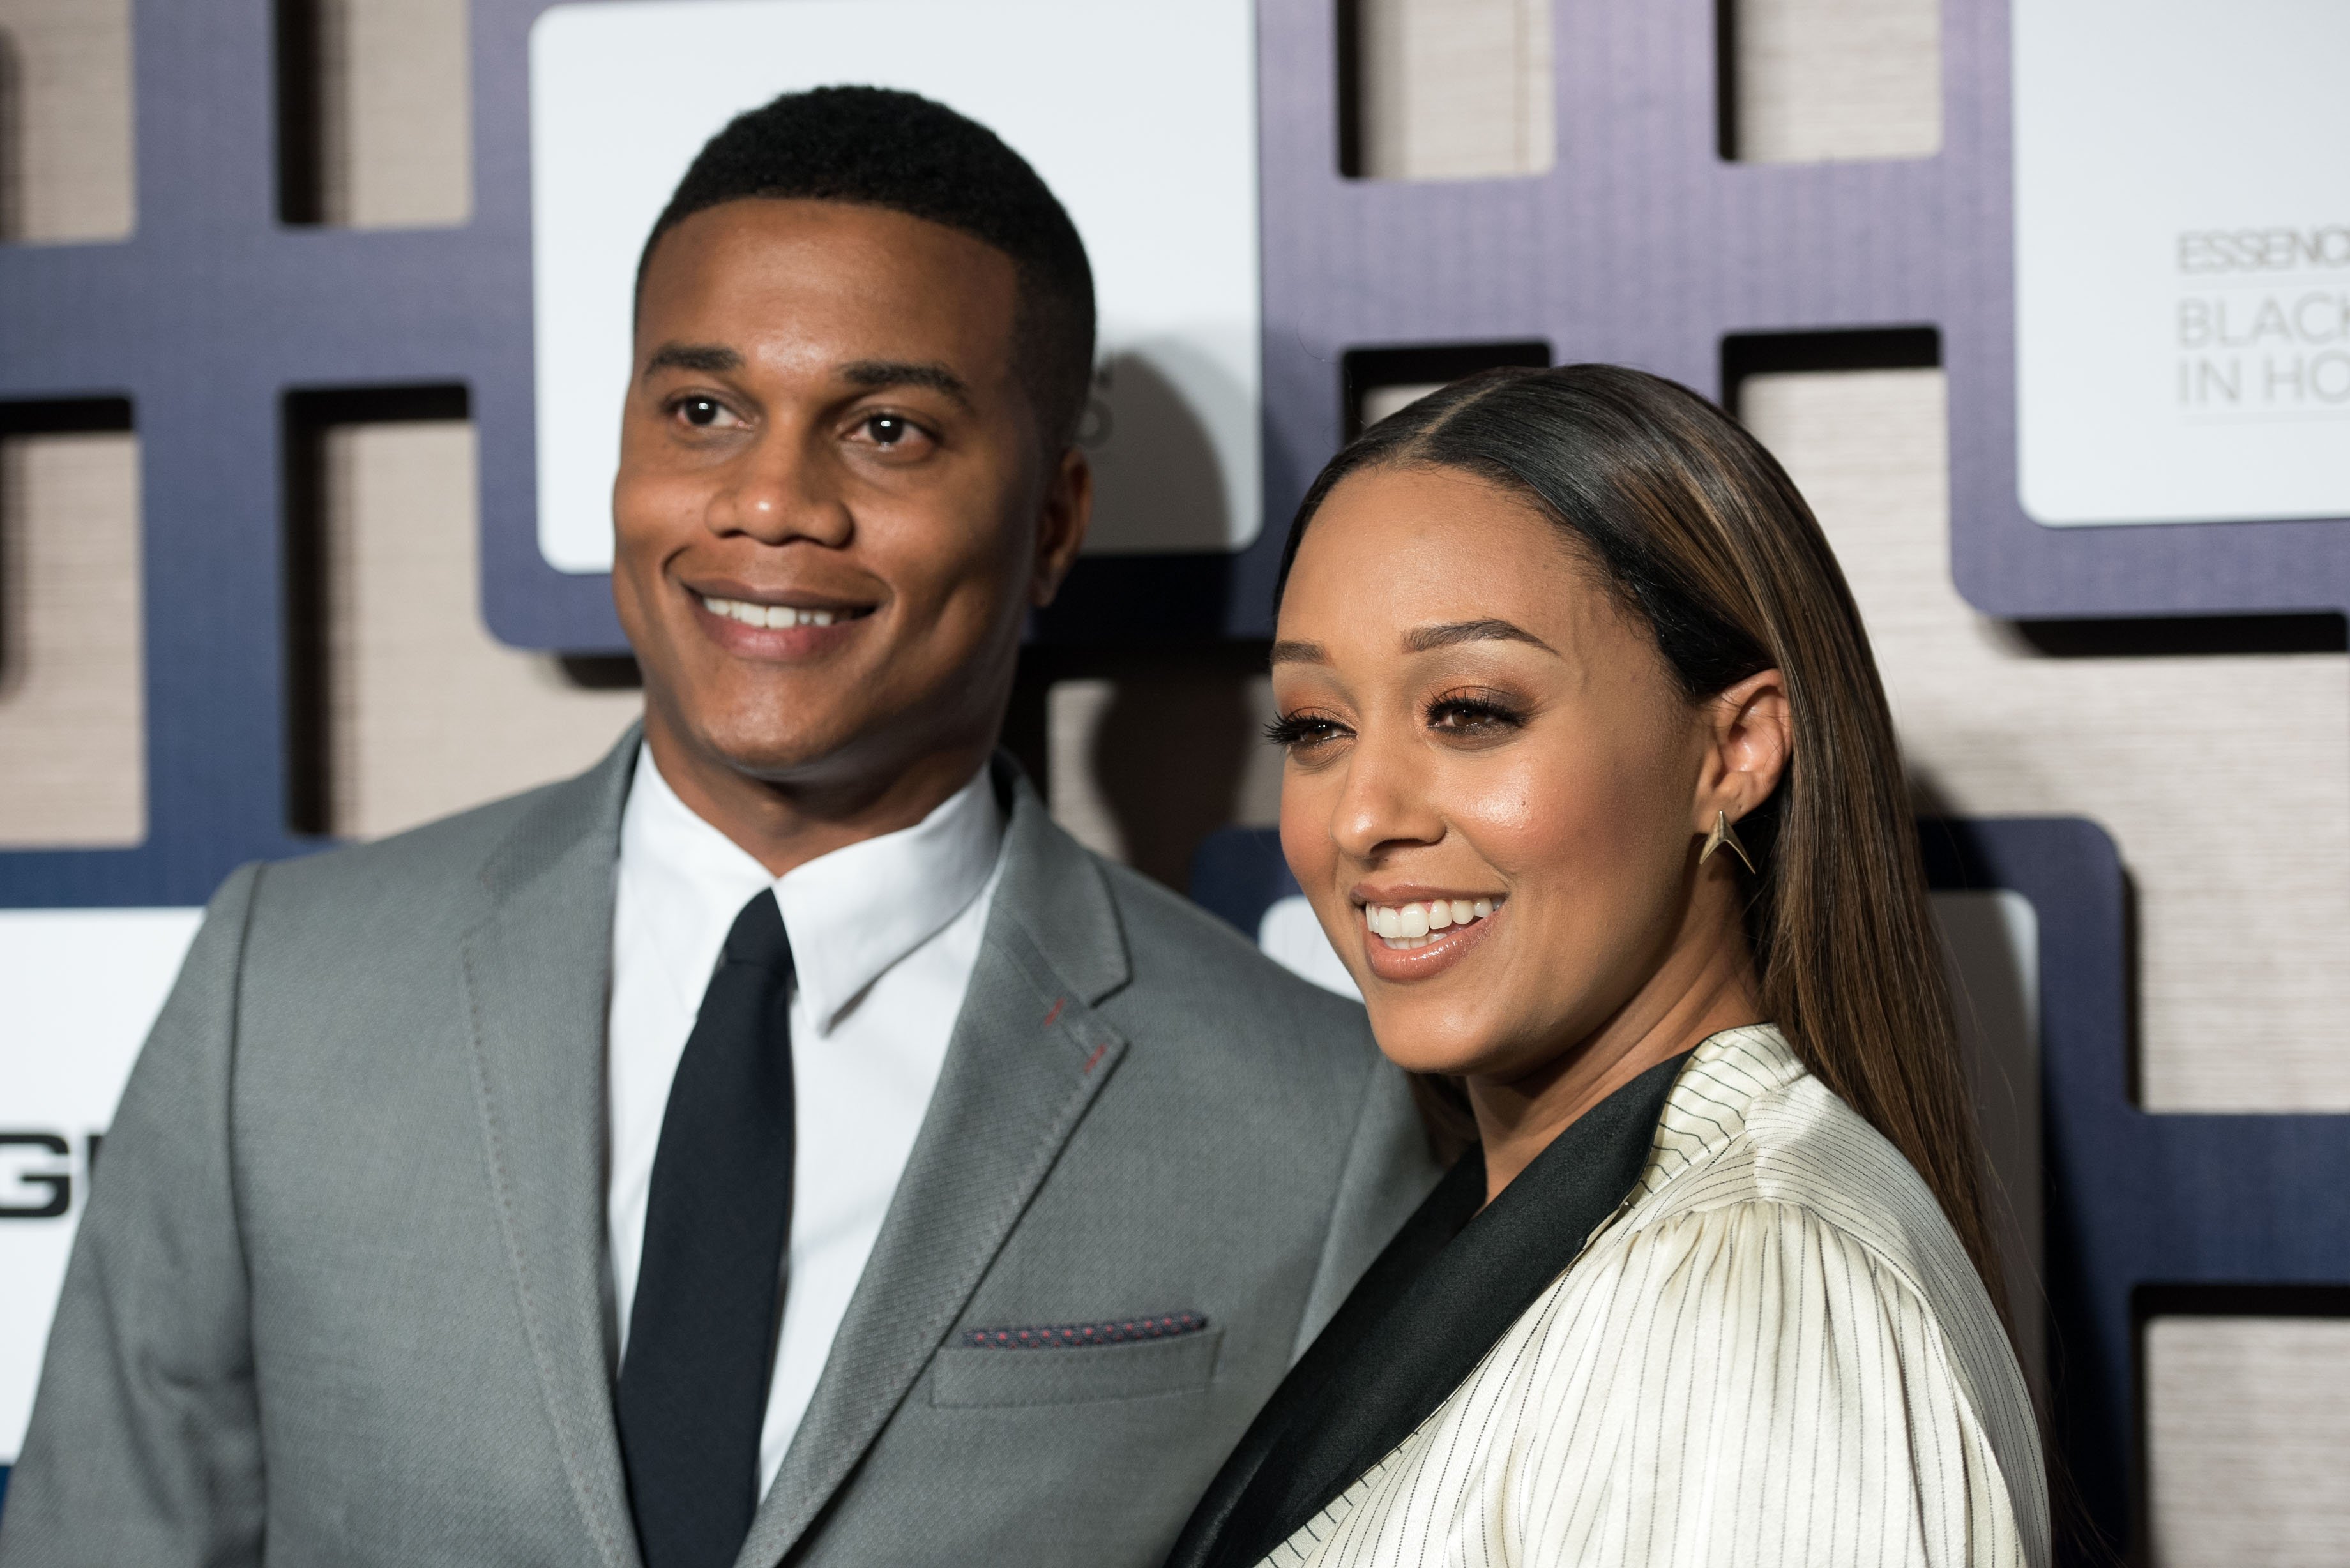 Cory Hardrict and Tia Mowry at the 8th Annual ESSENCE Black Women In Hollywood Luncheon on February 19, 2015, in Beverly Hills, California. | Source: Getty Images